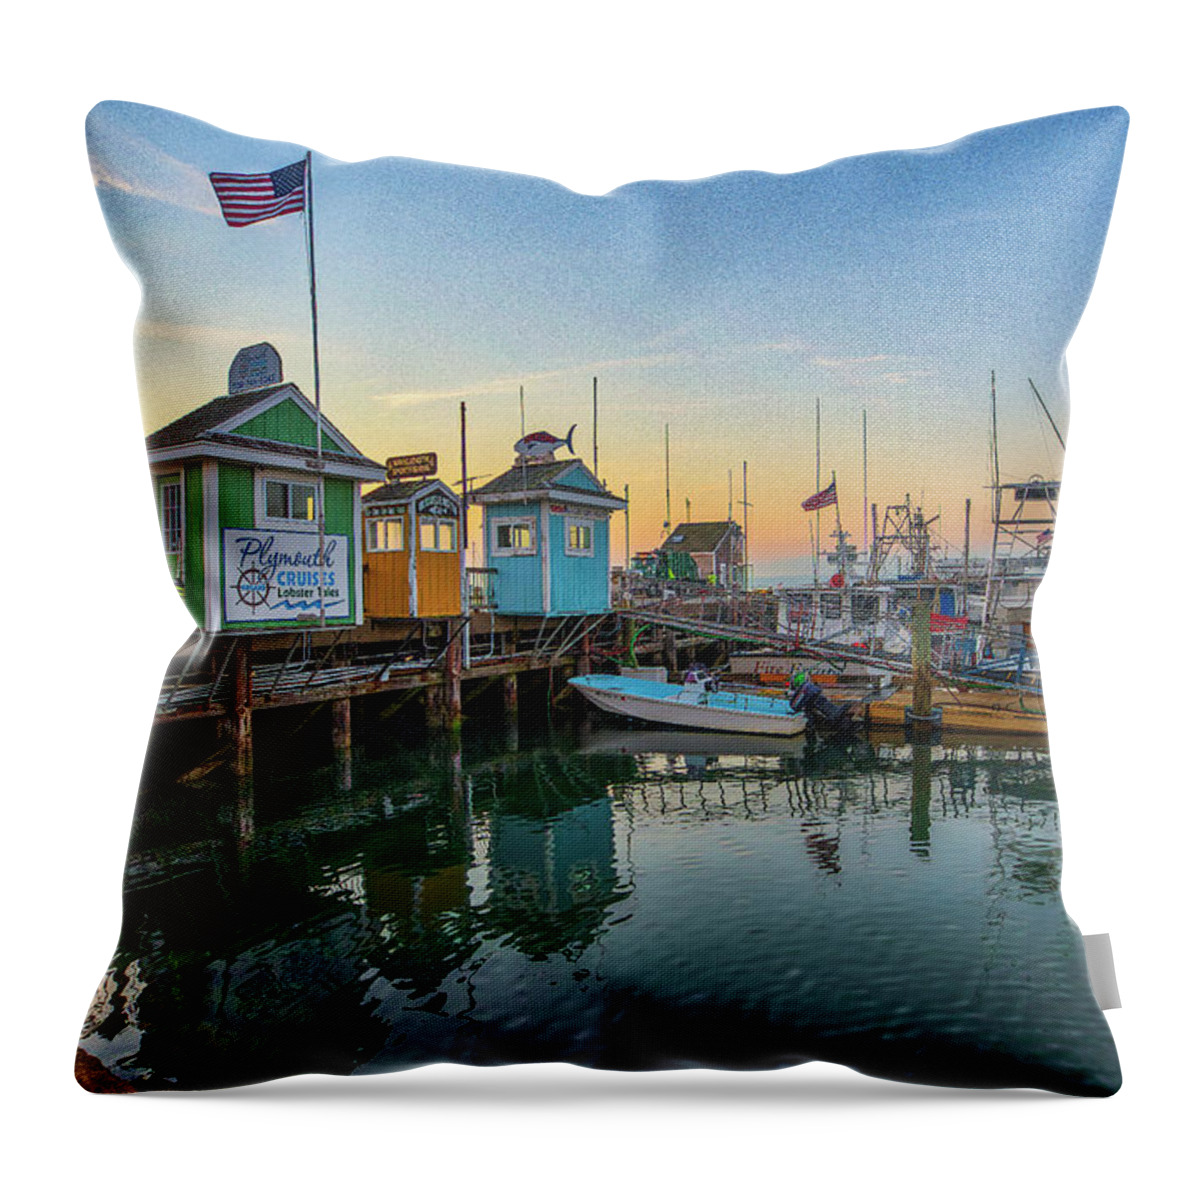 Plymouth Harbor Throw Pillow featuring the photograph Iconic Plymouth Harbor Whale Watching Deep Sea Fishing Harbor Cruises Tickets Booths by Juergen Roth